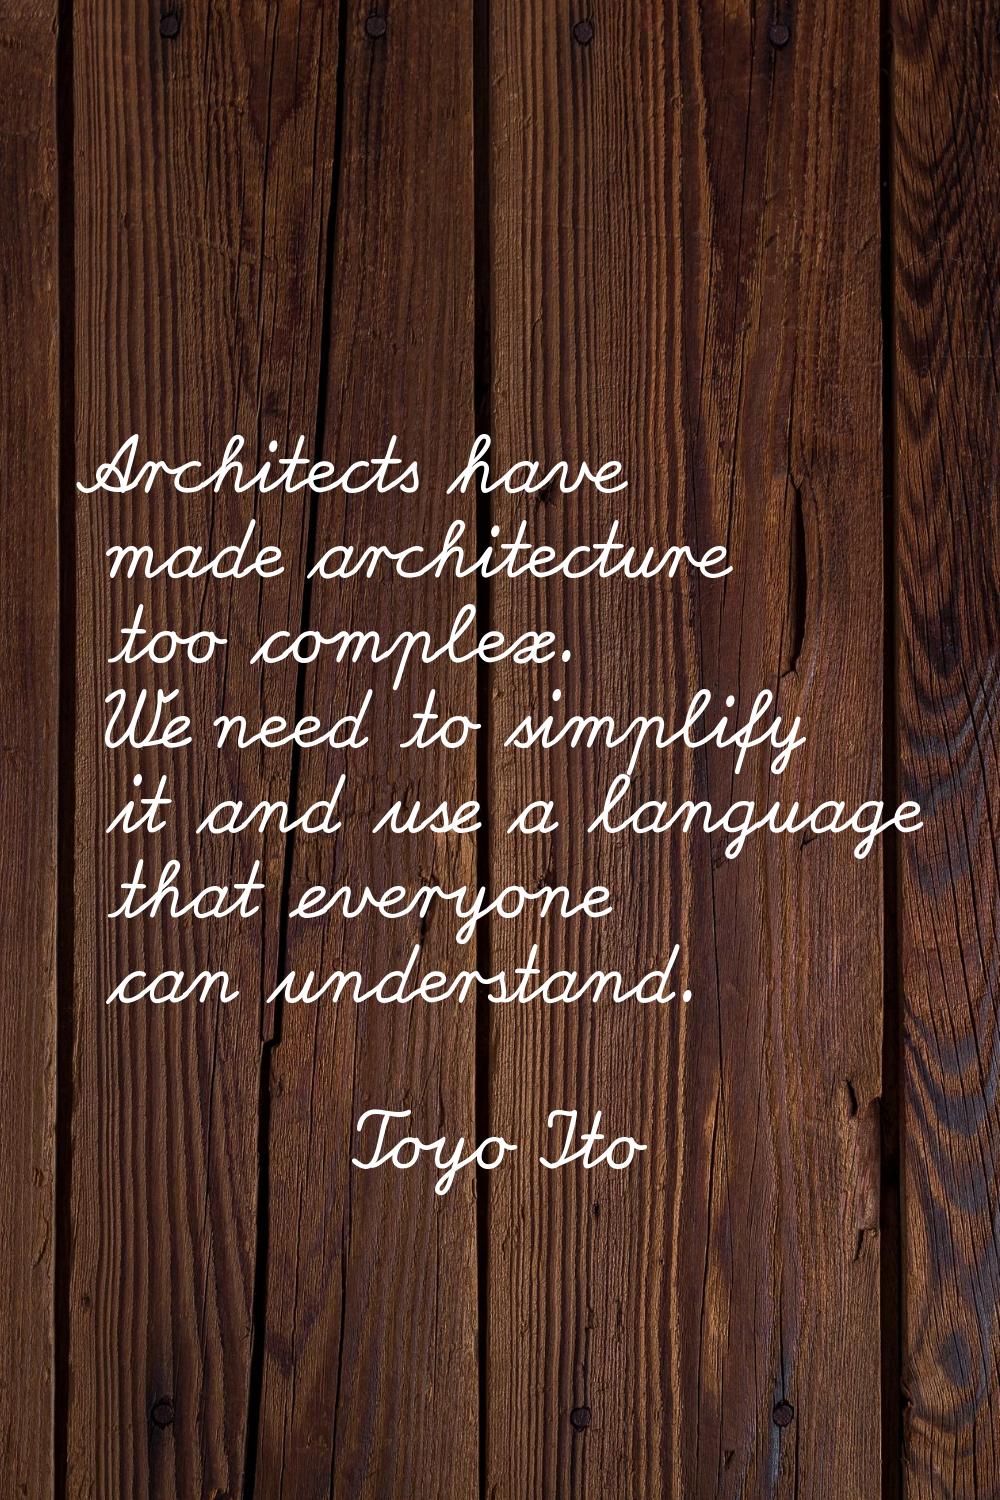 Architects have made architecture too complex. We need to simplify it and use a language that every